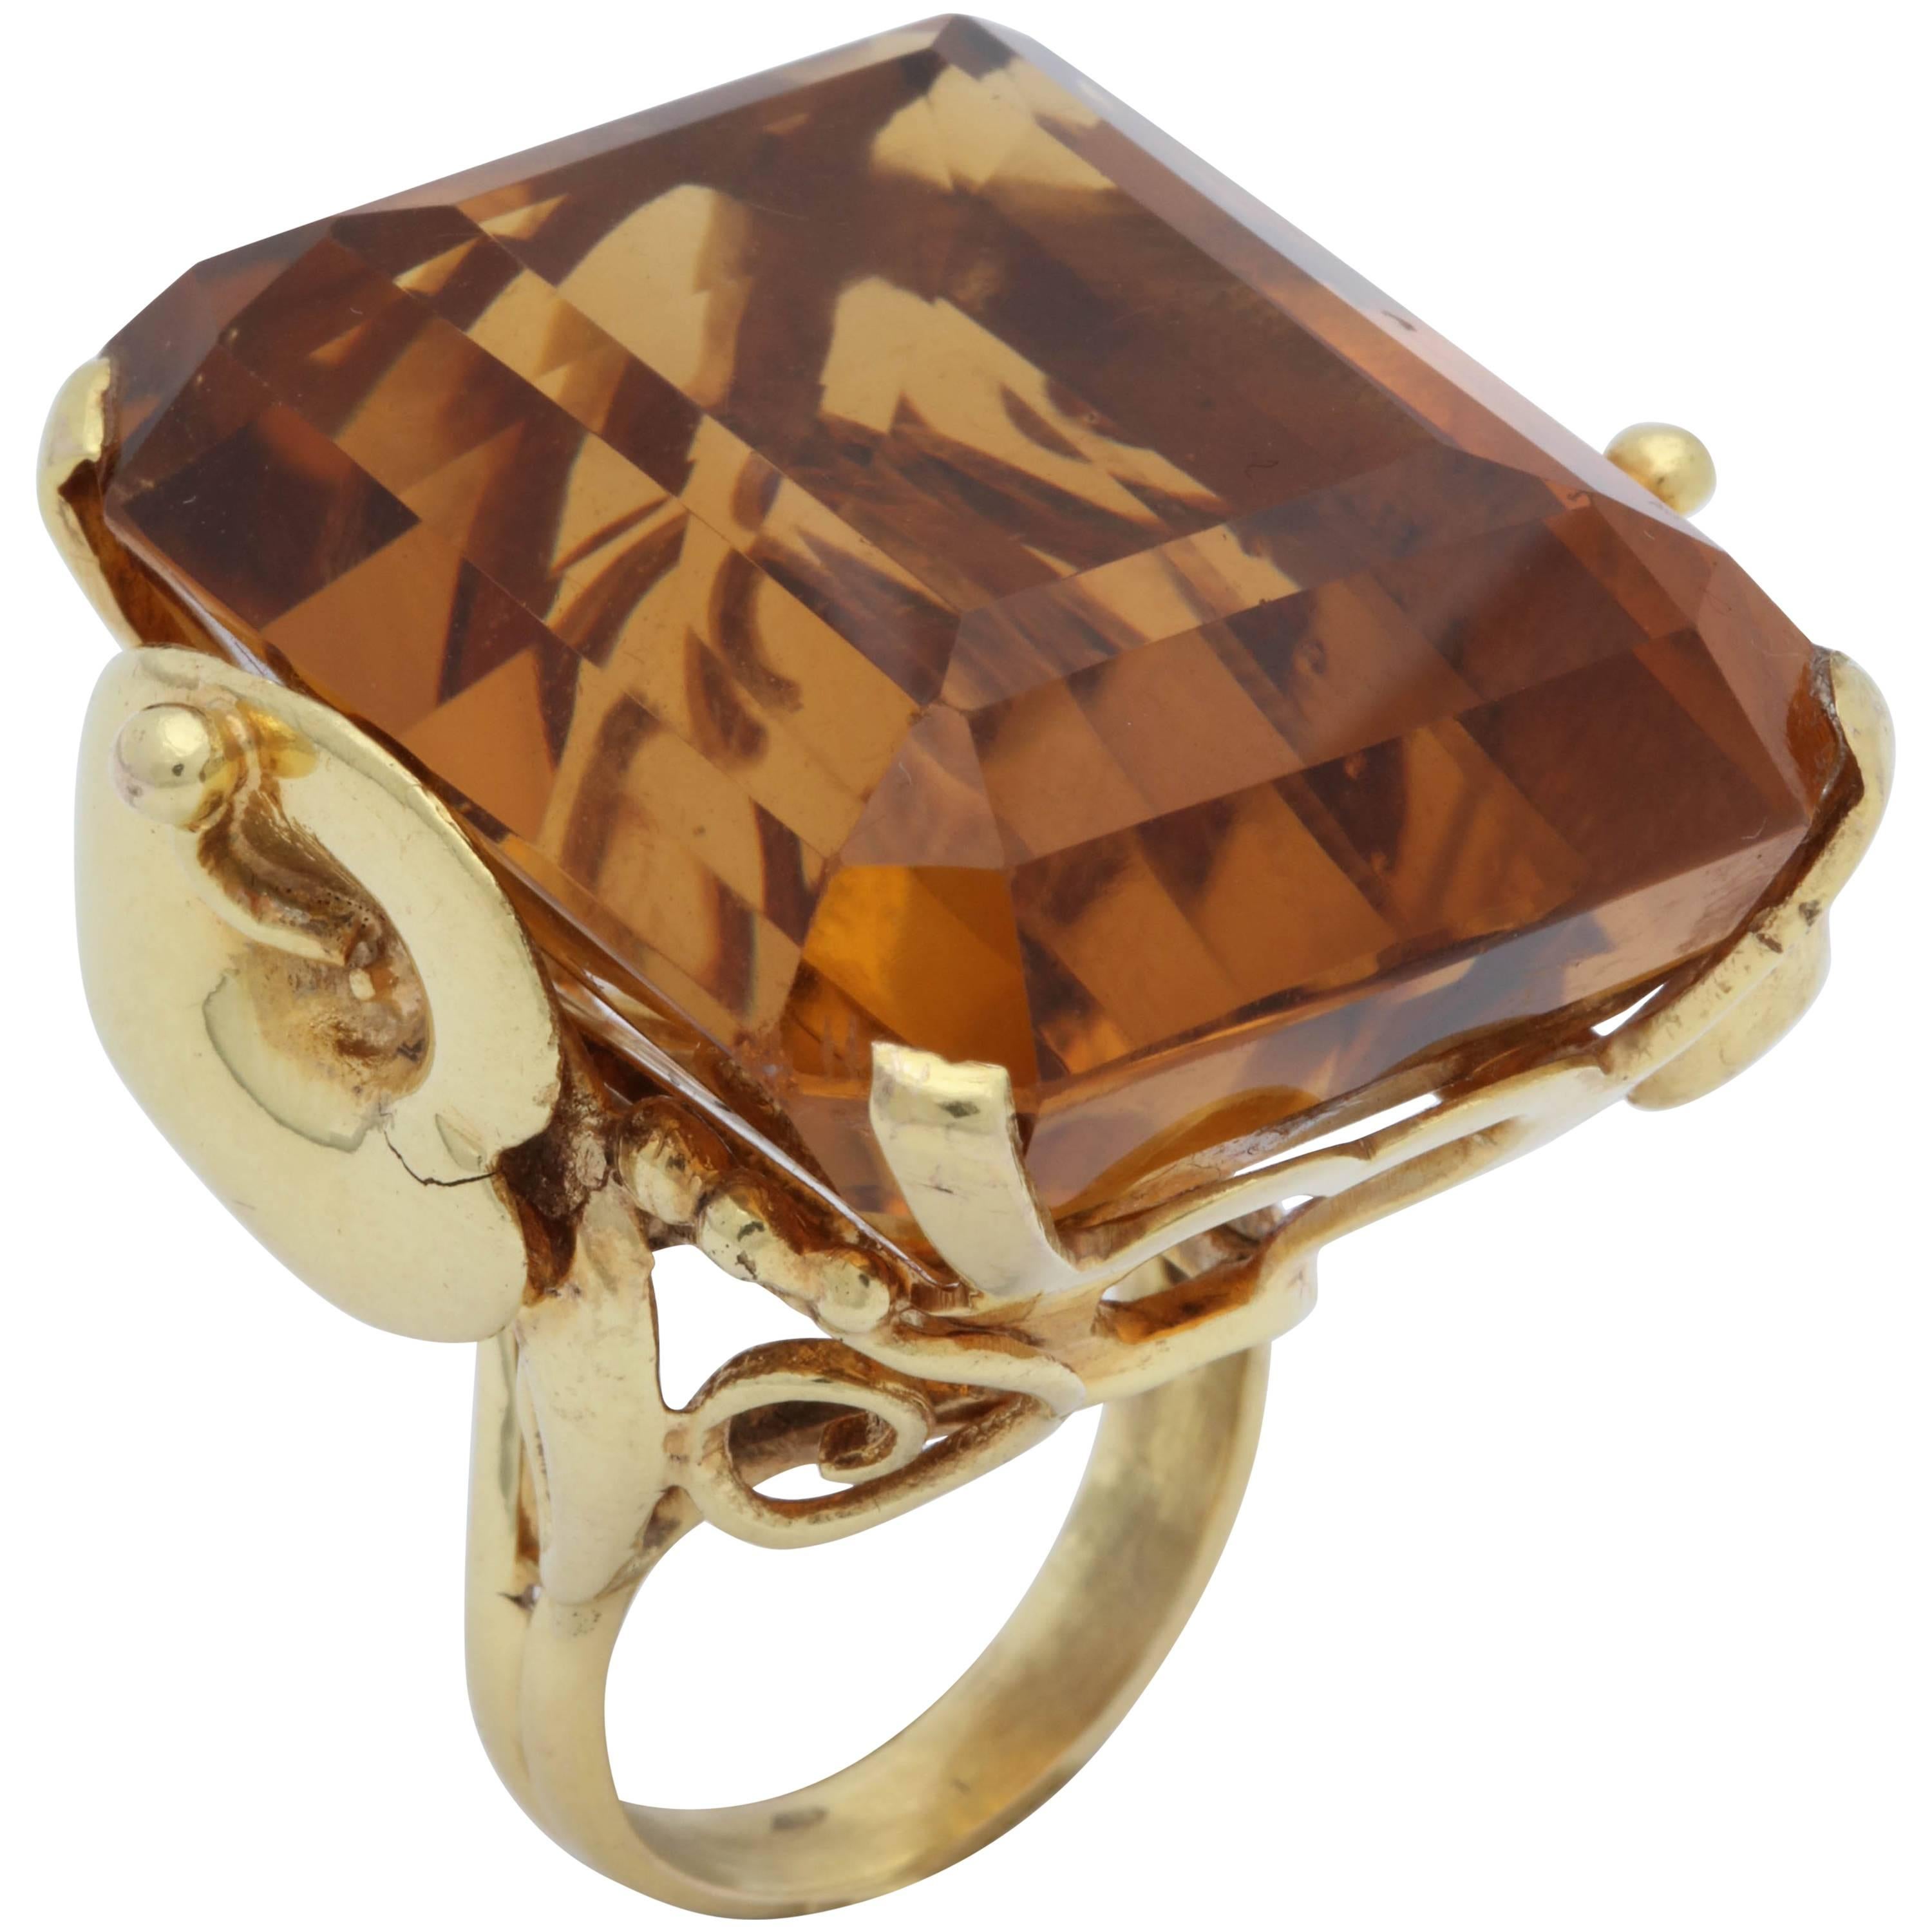 1940s Impressive Large Honey Citrine with Sculptural Gold Mounting Cocktail Ring